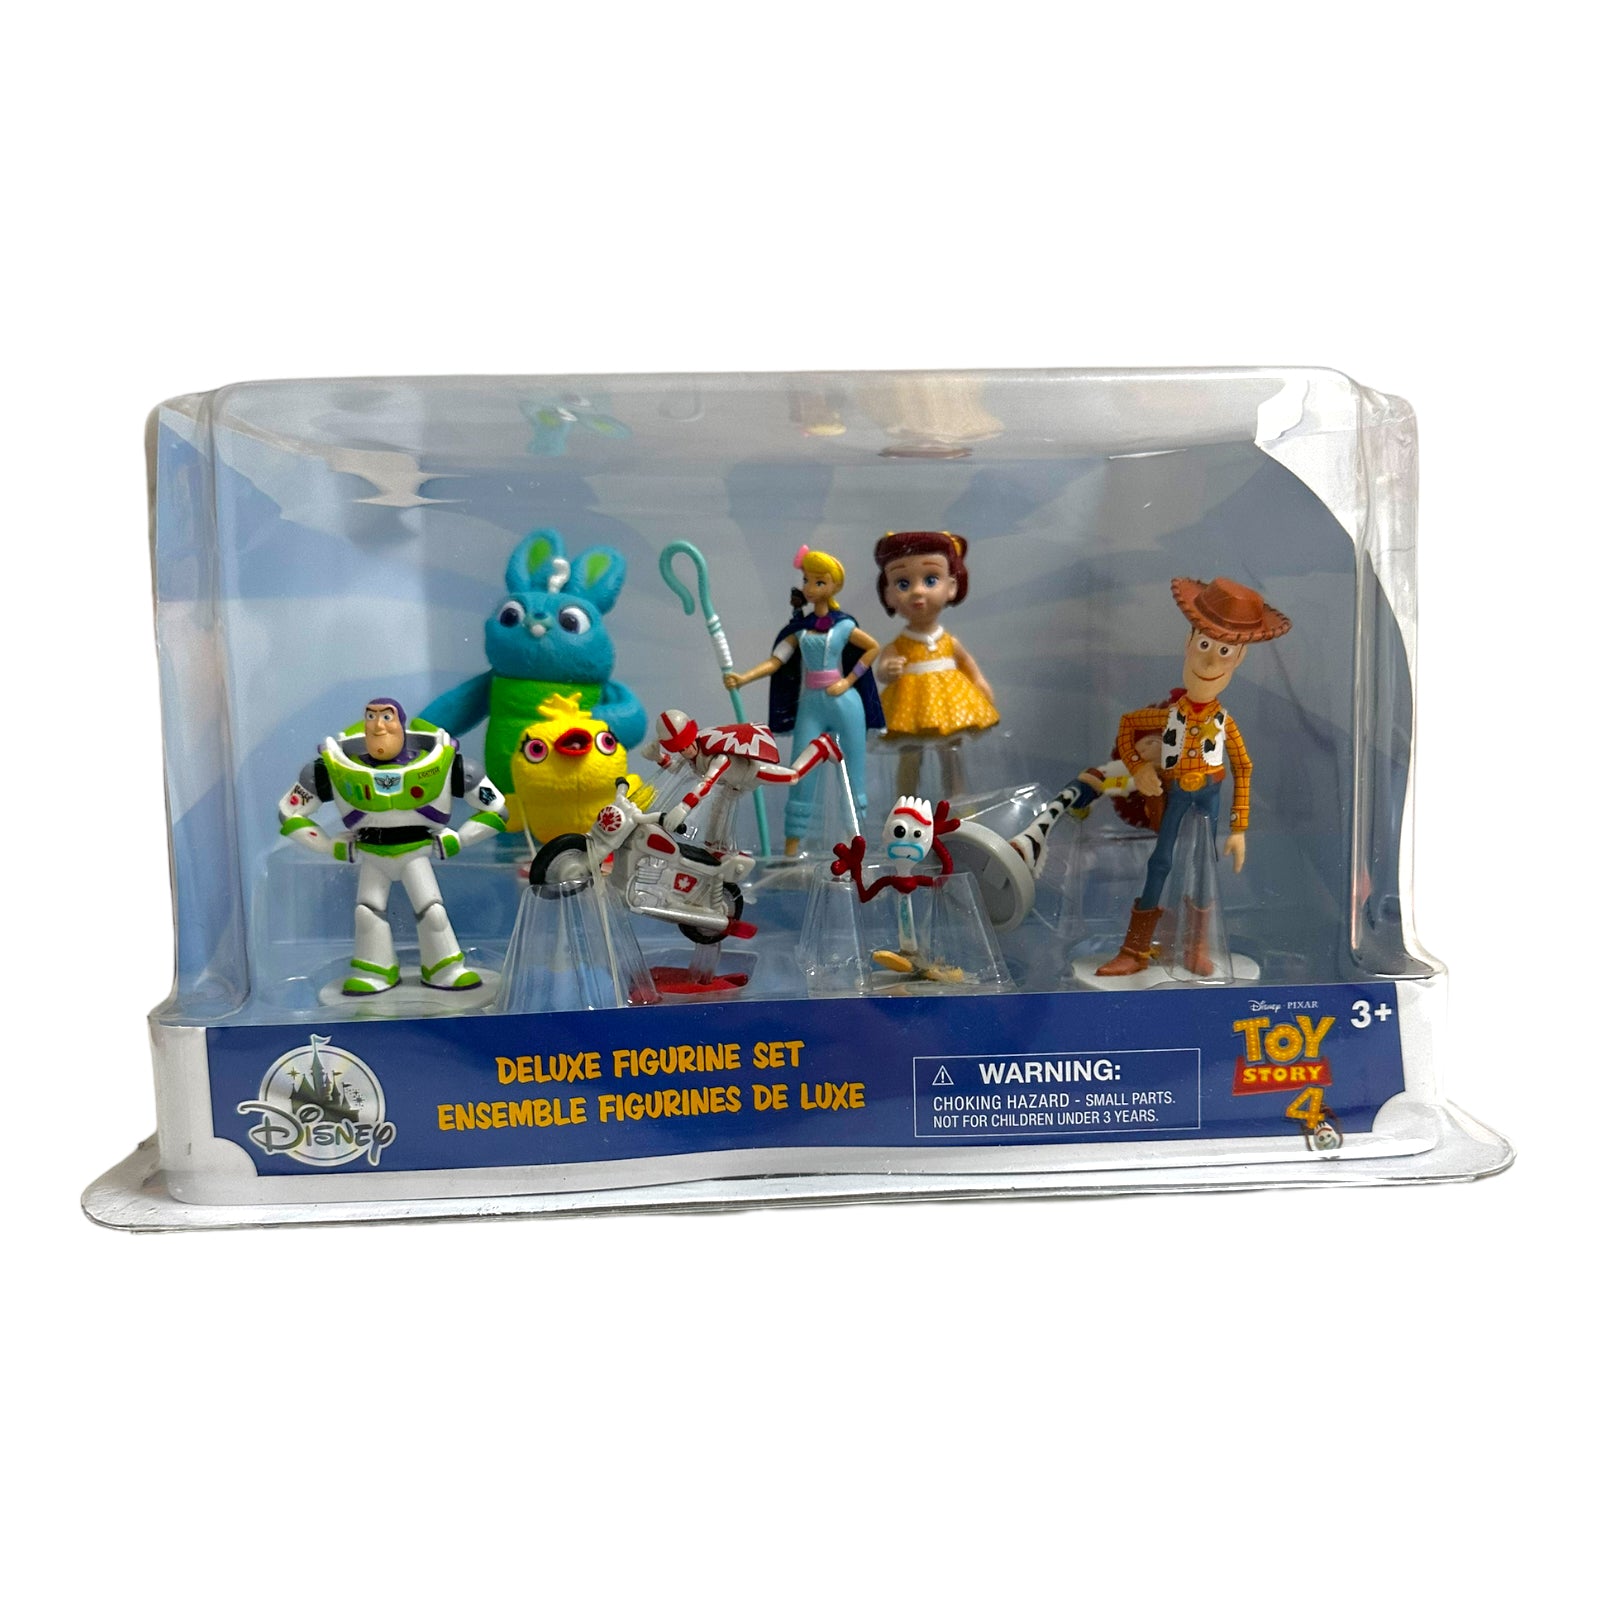 Toy Story Deluxe Figure Play Set